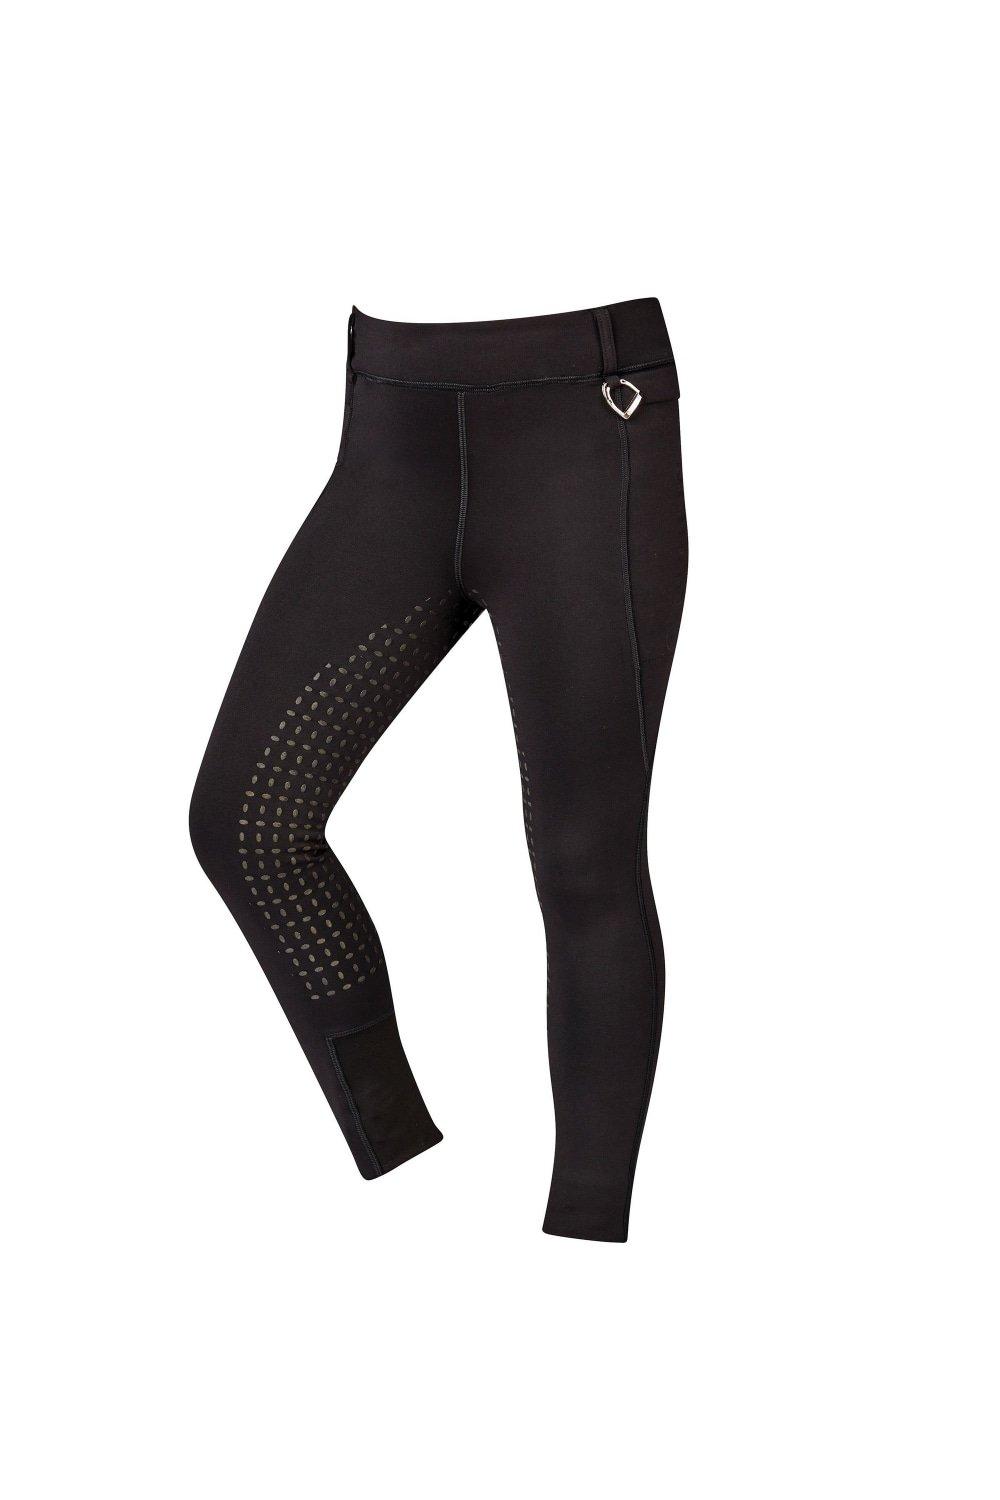 Dublin Warm It Thermodynamic Horse Riding Tights - ShopStyle Girls' Trousers